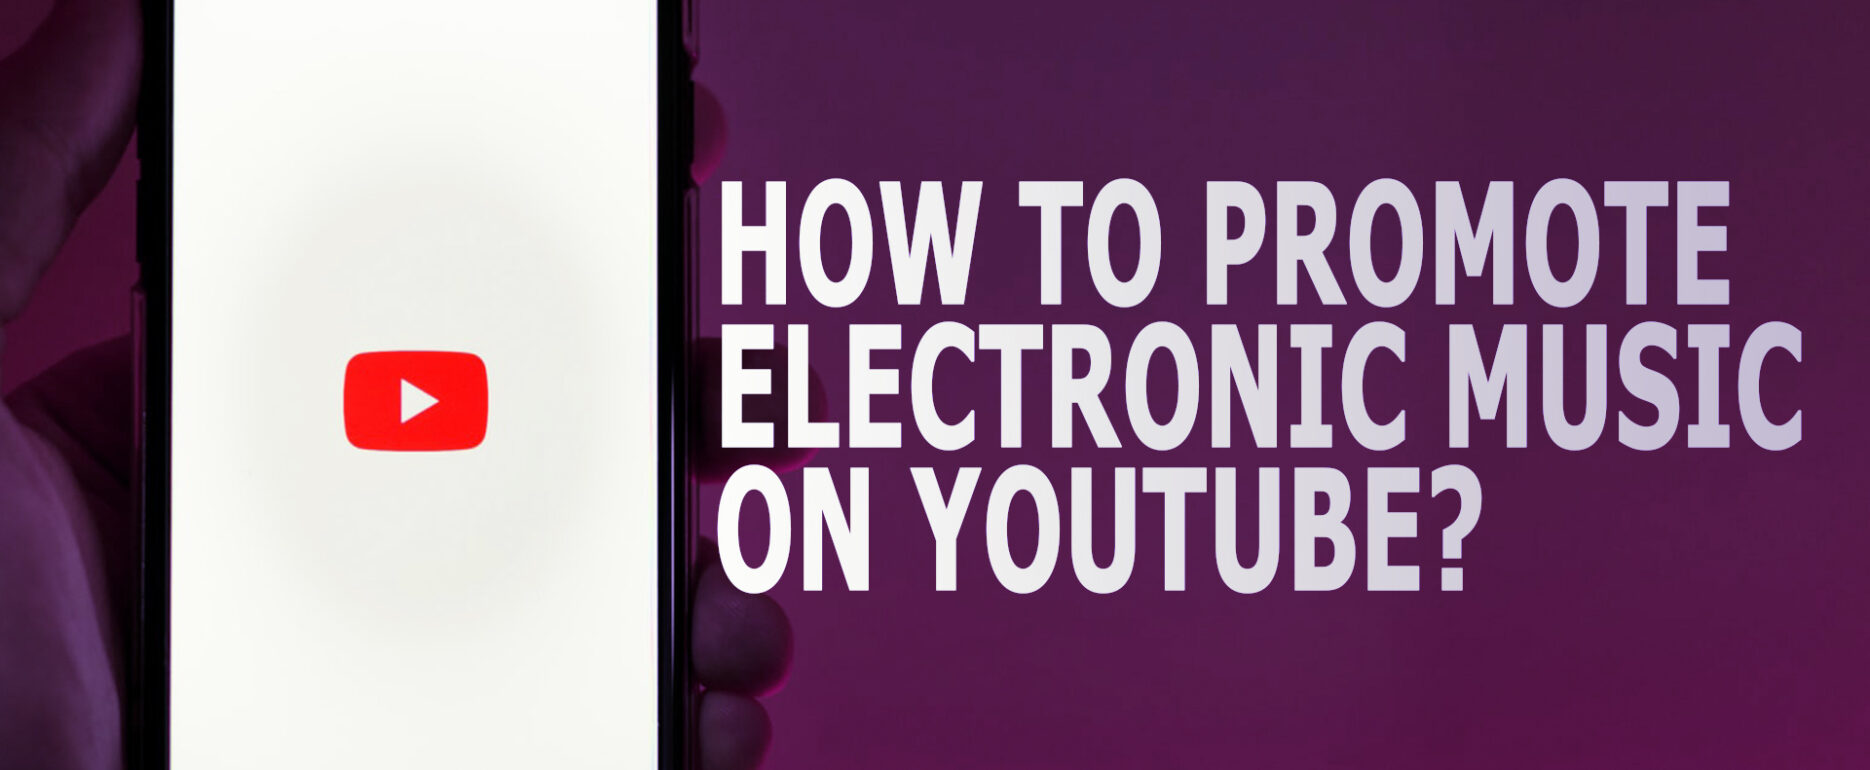 how to promote electronic music on Youtube